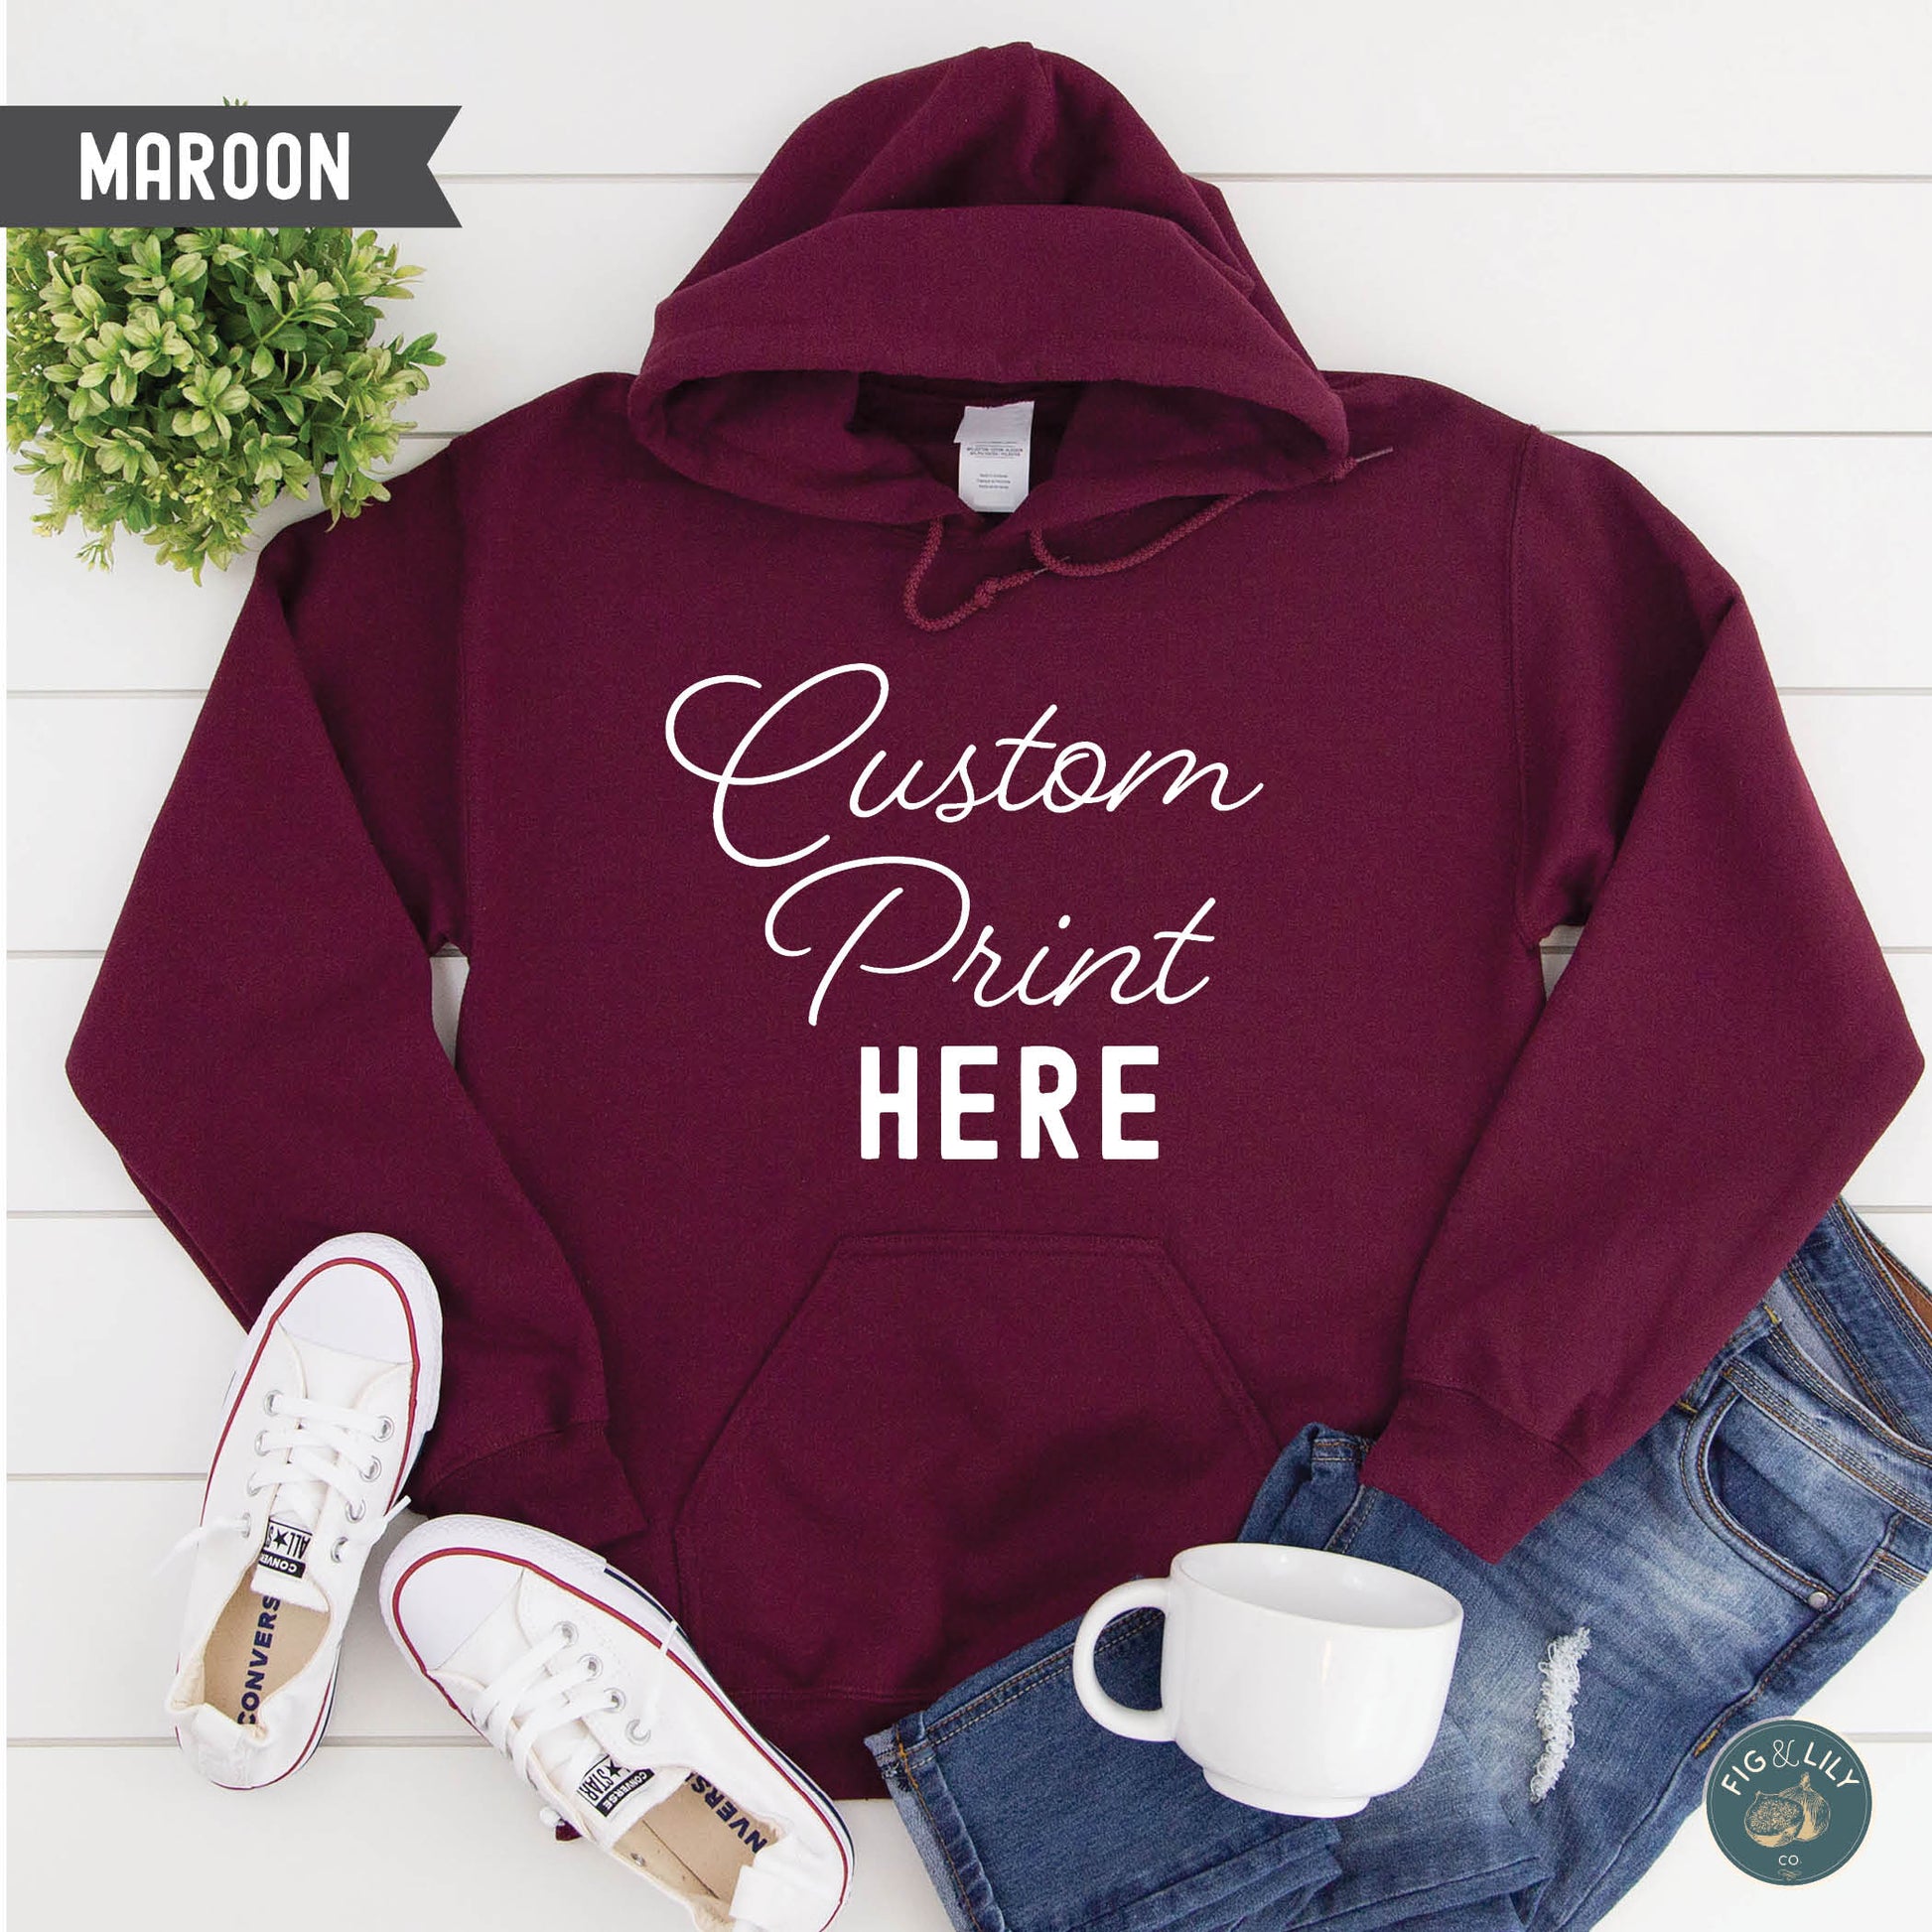 Maroon cozy Unisex Hoodie, Custom Printed sweatshirt Design, Your Design Here, Personalized Design created just for you, digital proof approval included